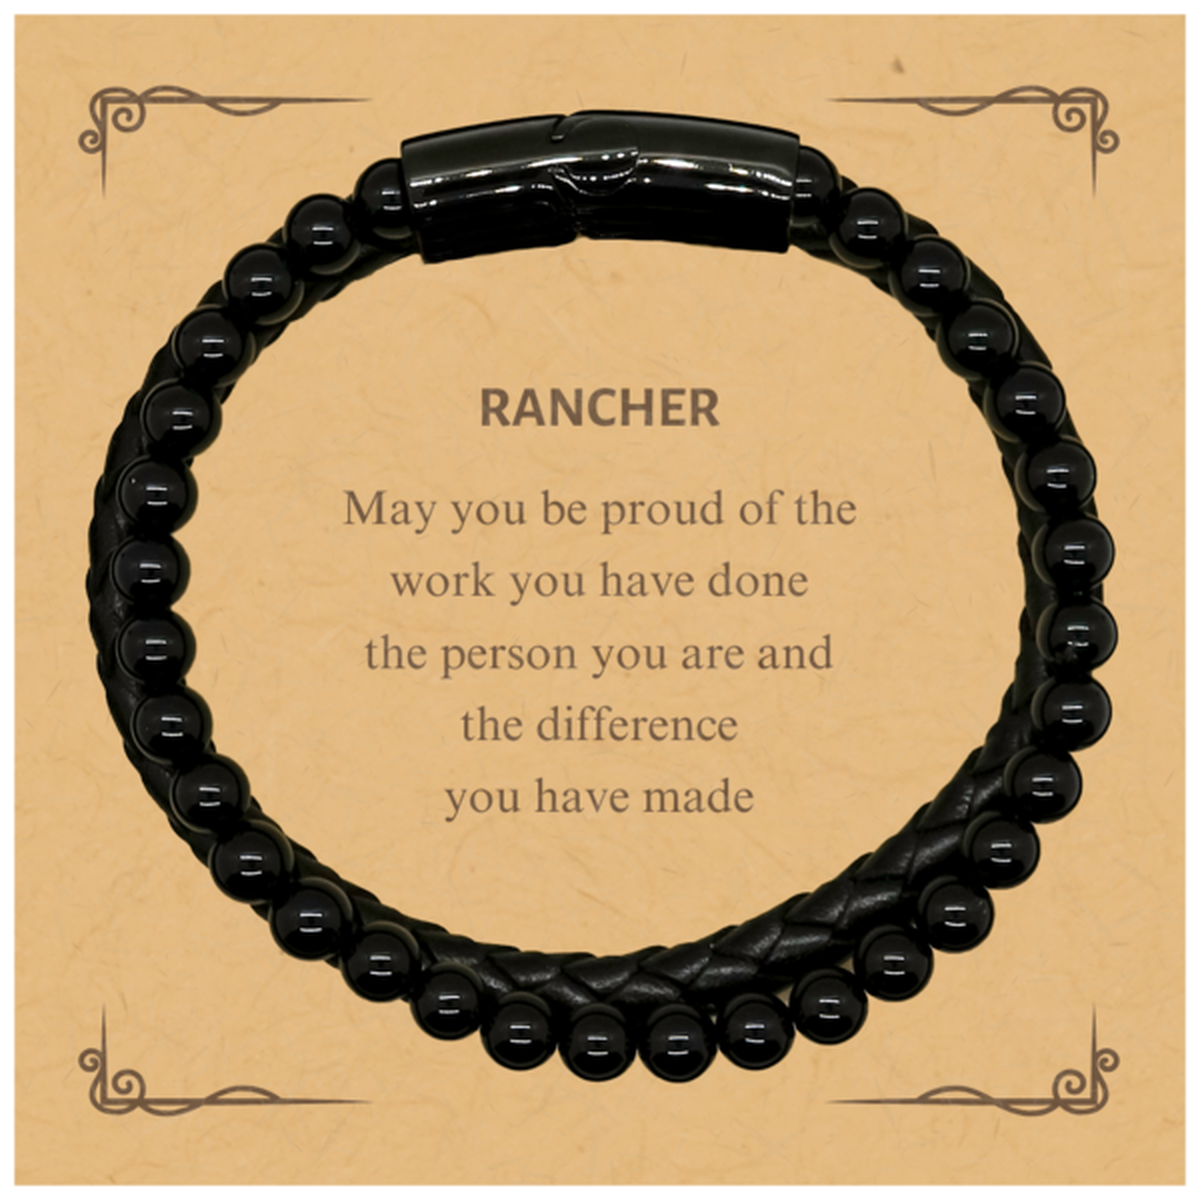 Rancher May you be proud of the work you have done, Retirement Rancher Stone Leather Bracelets for Colleague Appreciation Gifts Amazing for Rancher